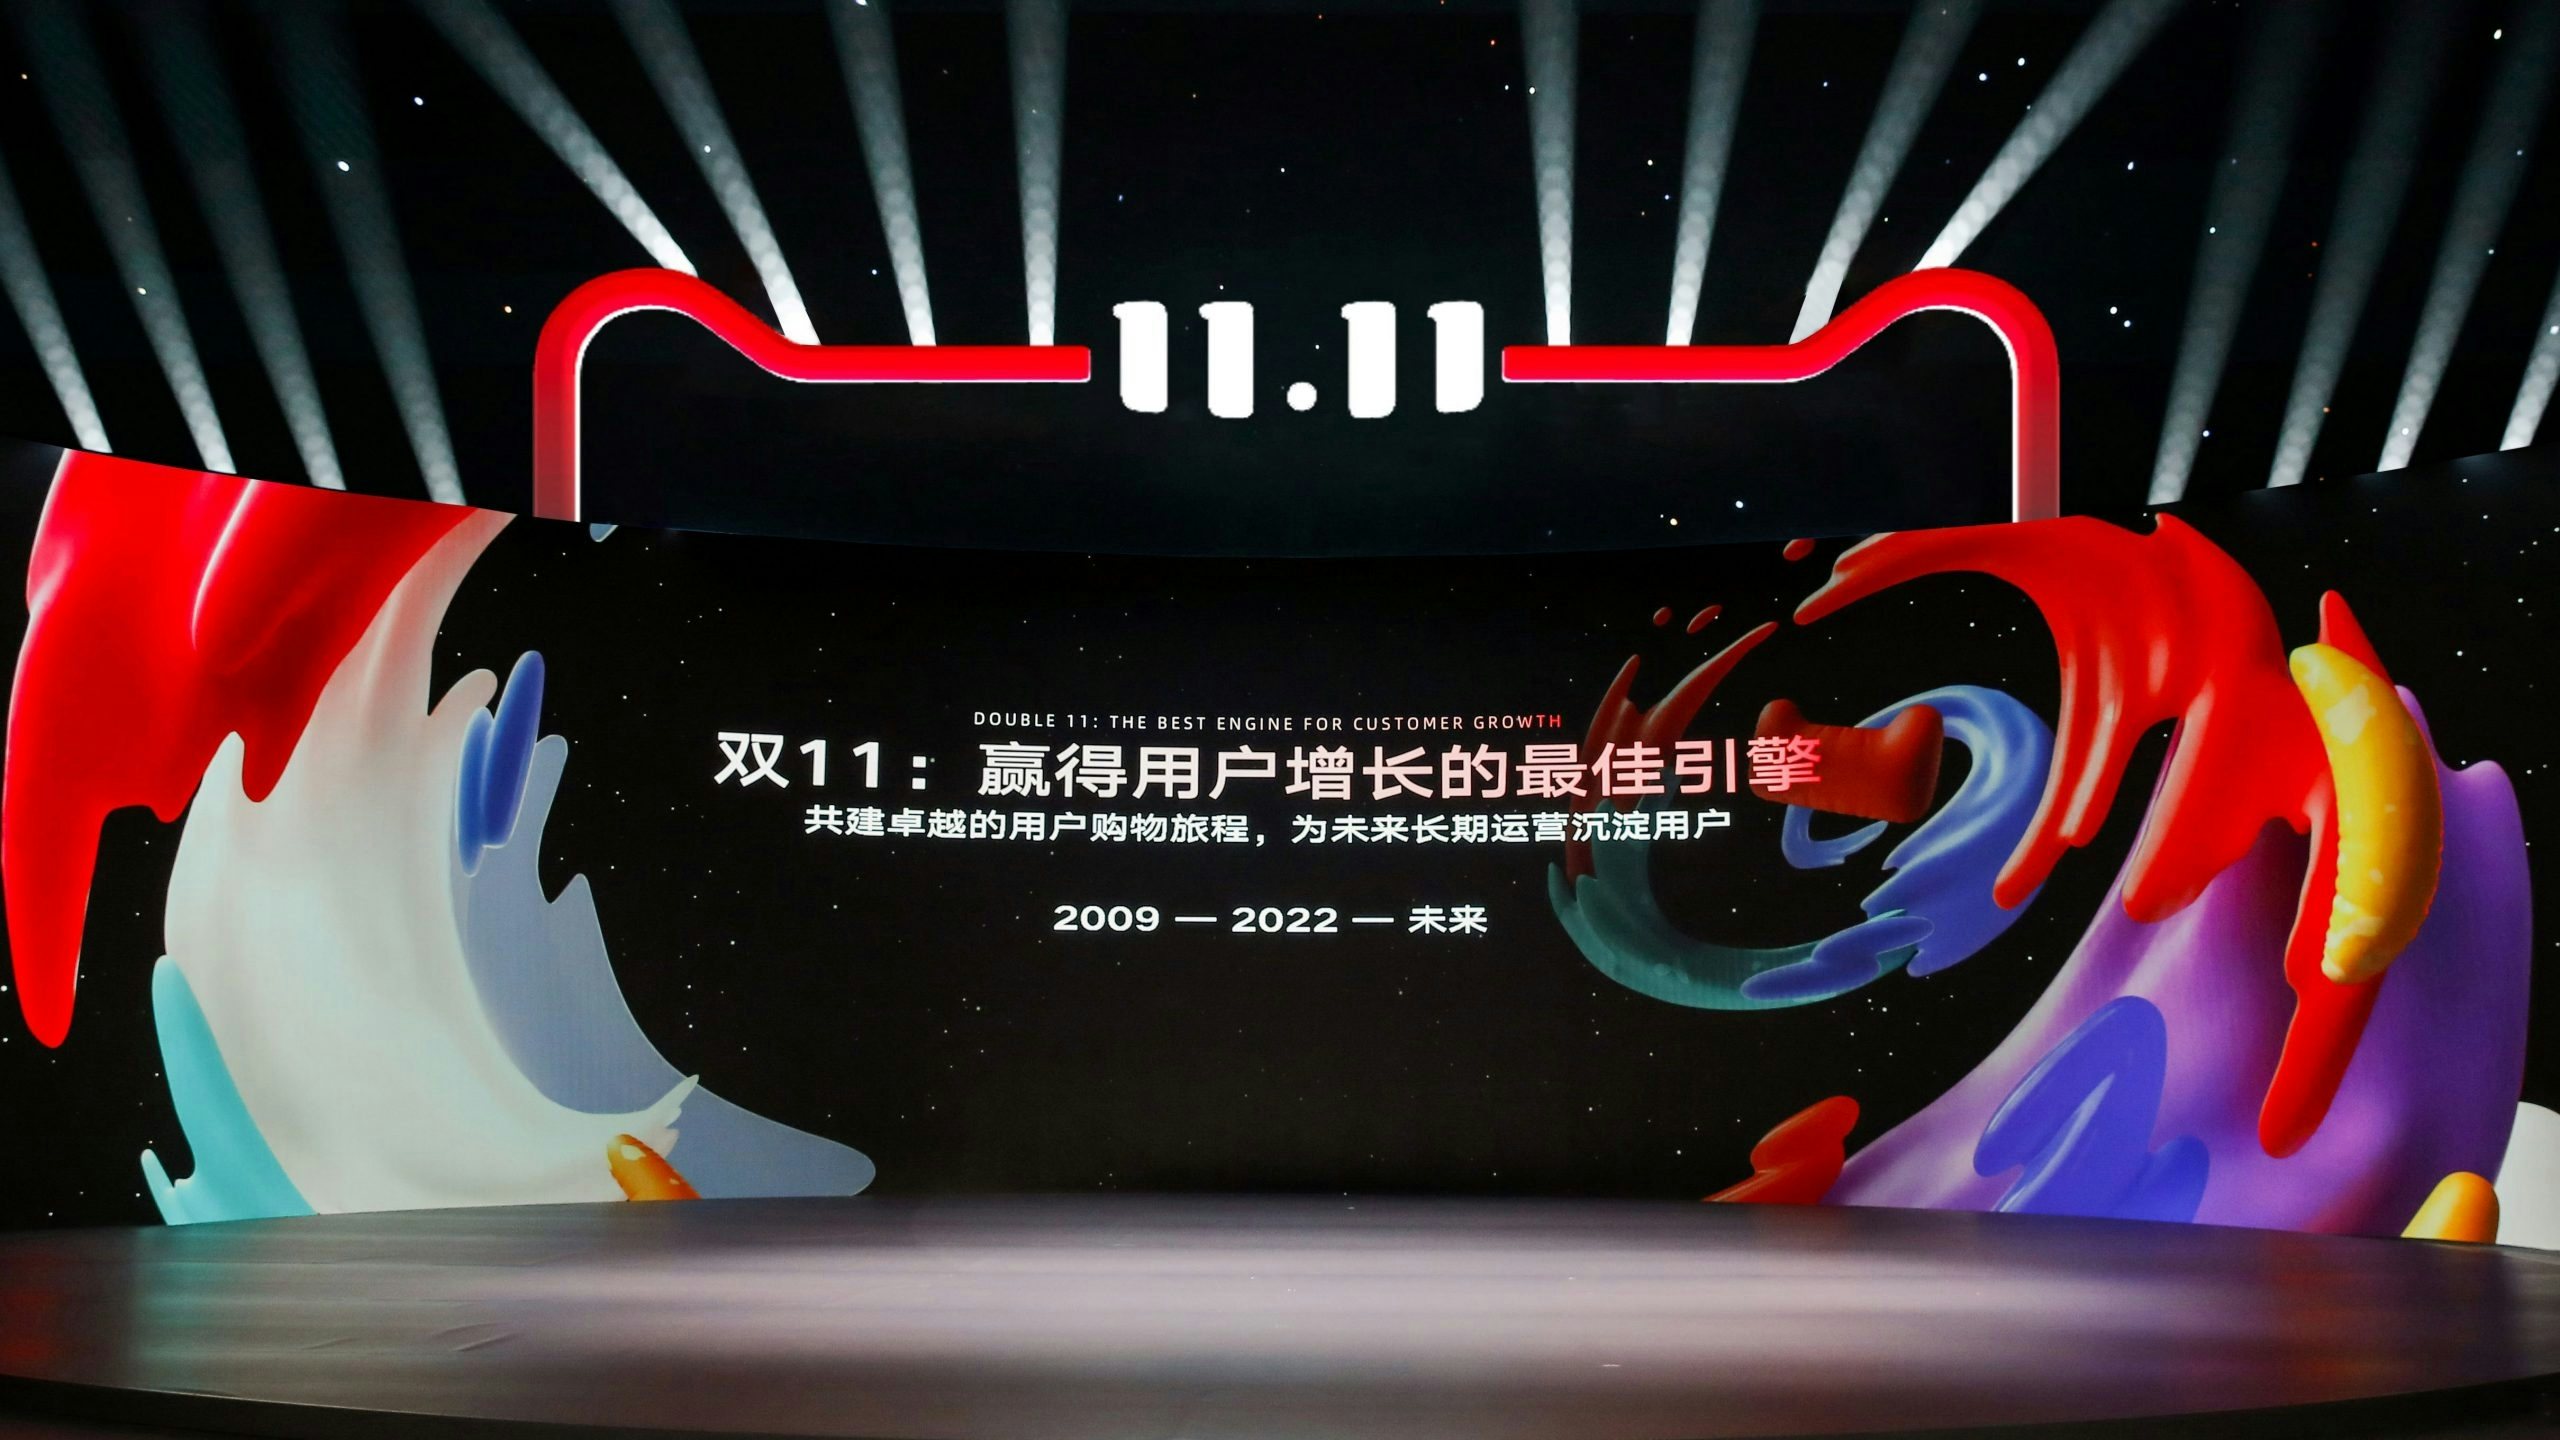 Alibaba's 11.11 Global Shopping Festival is one of the most powerful engine for merchants' customer growth every year. Photo: Courtesy of Alibaba 